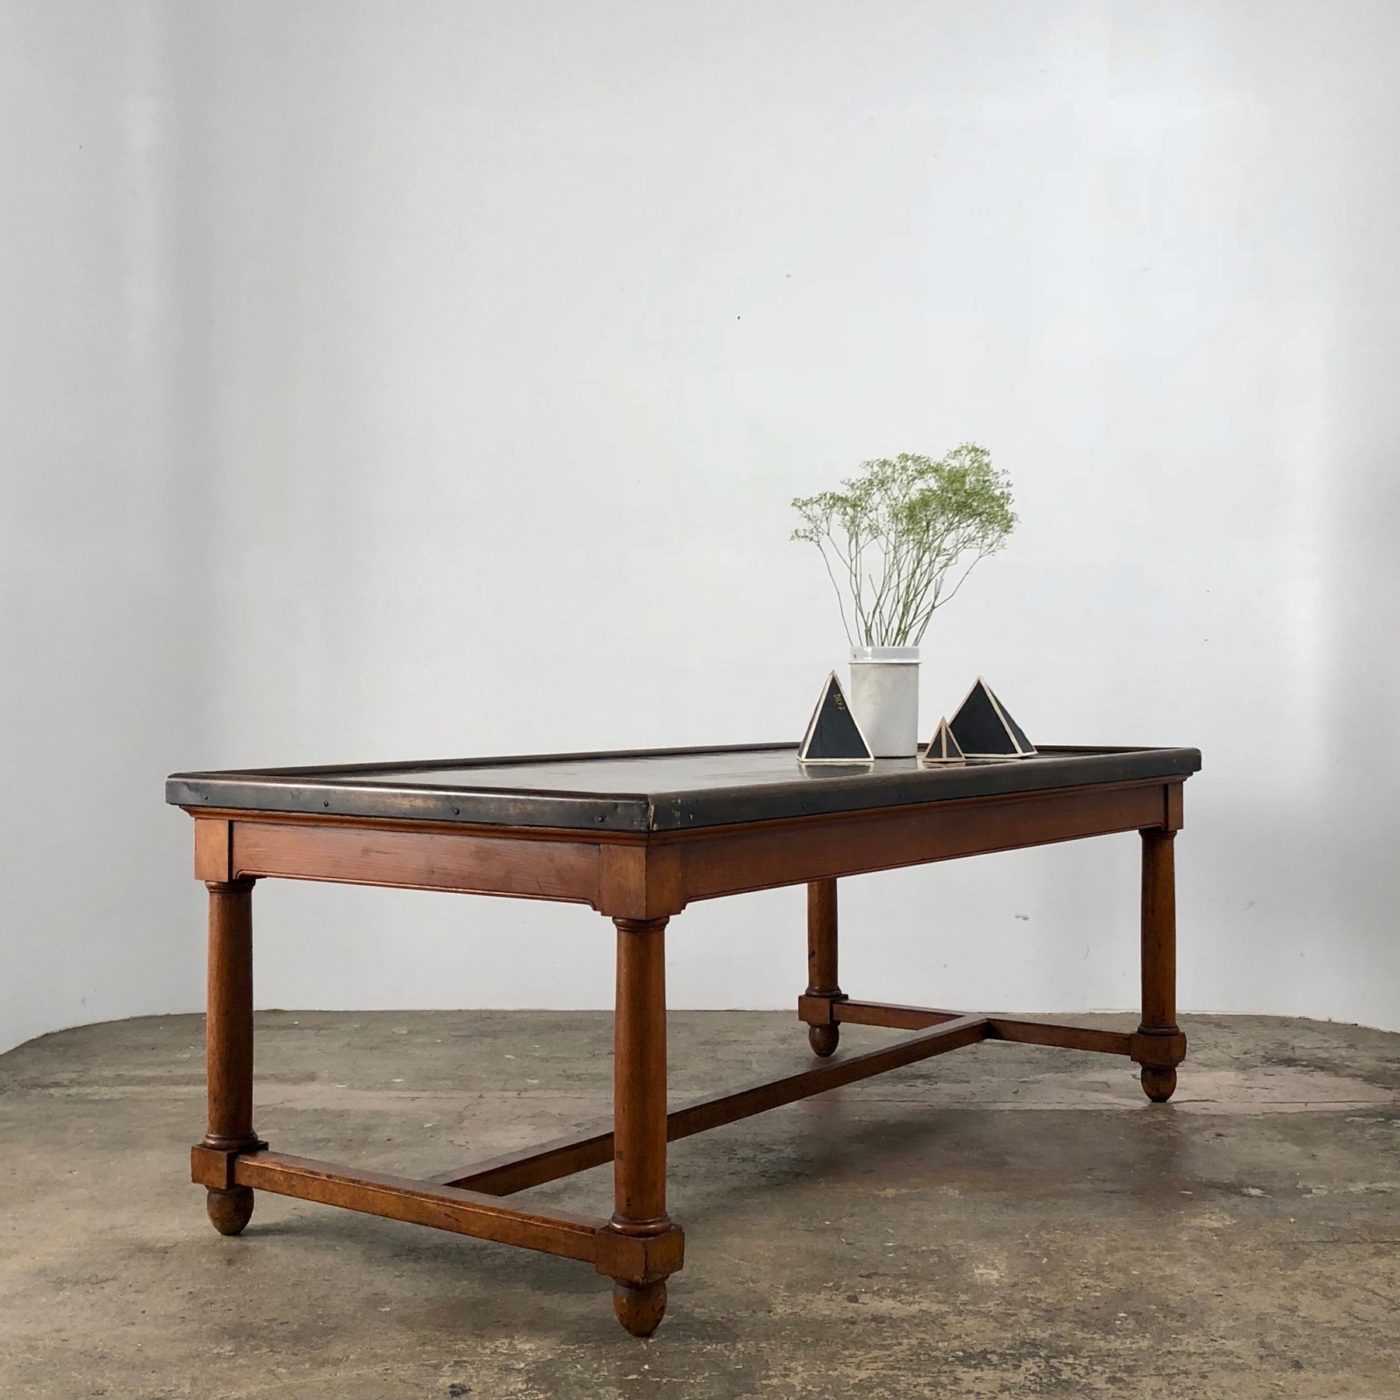 copper-bank-table0005